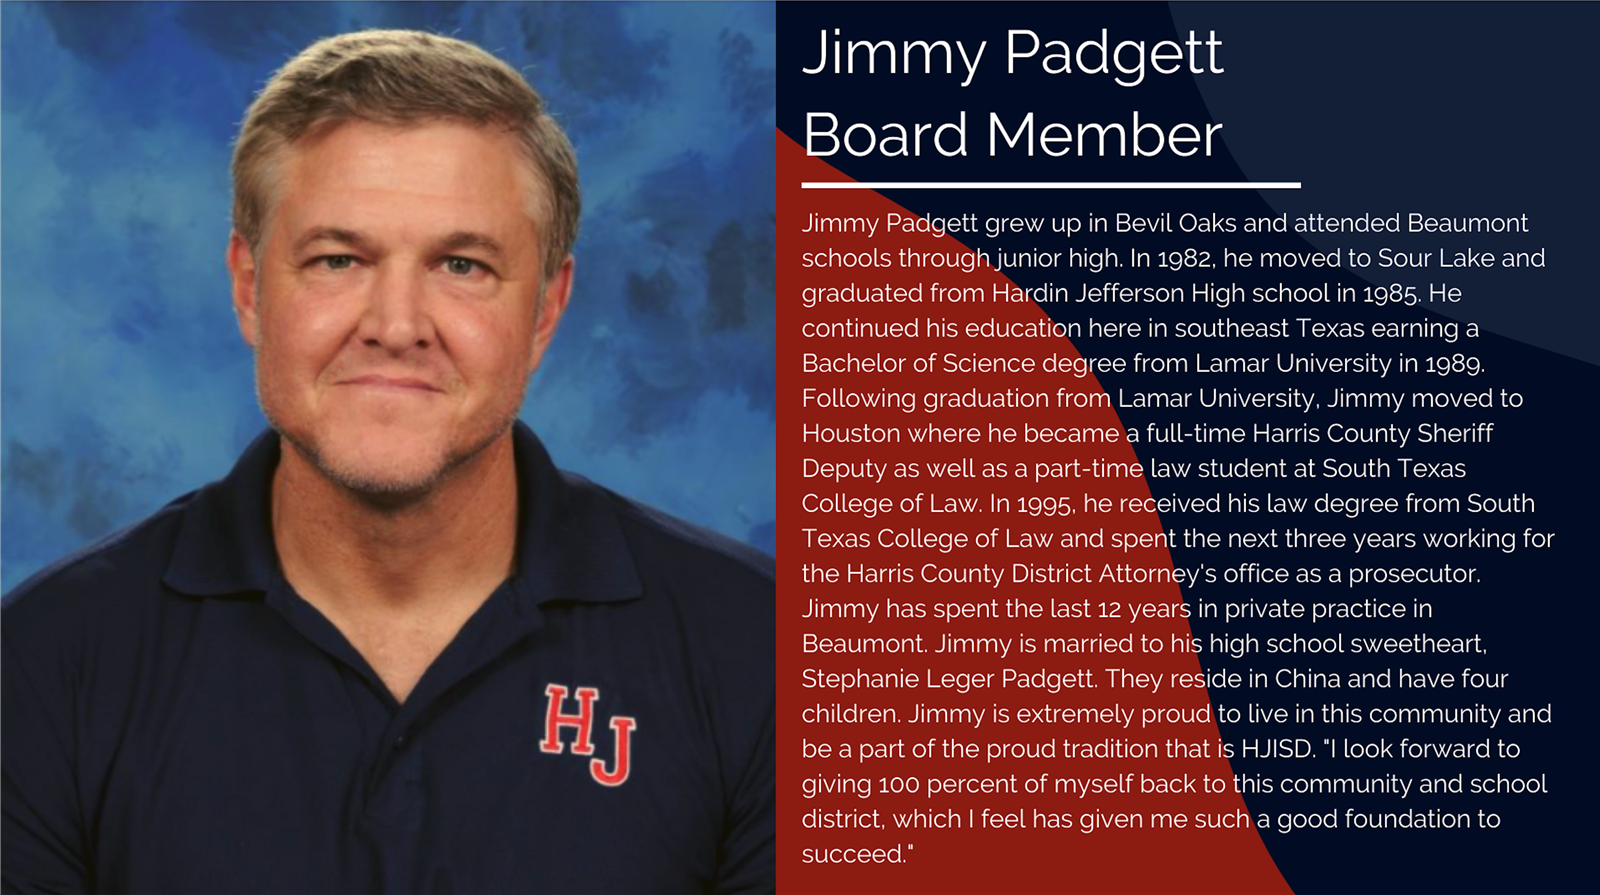 Jimmy Padgett grew up in Bevil Oaks and attended Beaumont schools through junior high. In 1982, he moved to Sour Lake and gra 